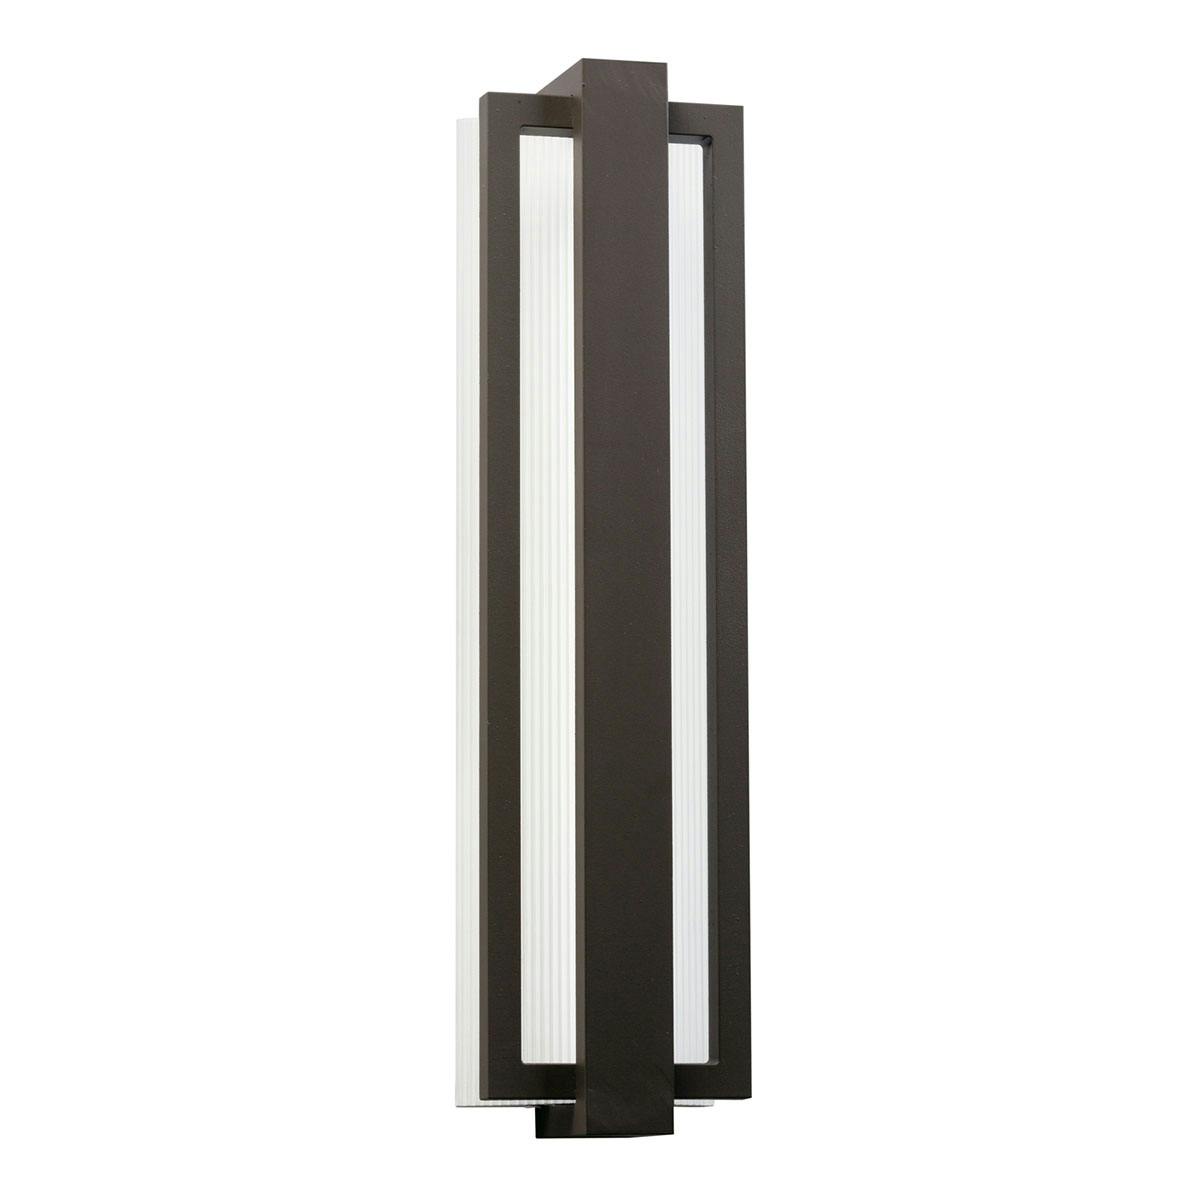 Sedo 24.25" LED Wall Light in Bronze on a white background